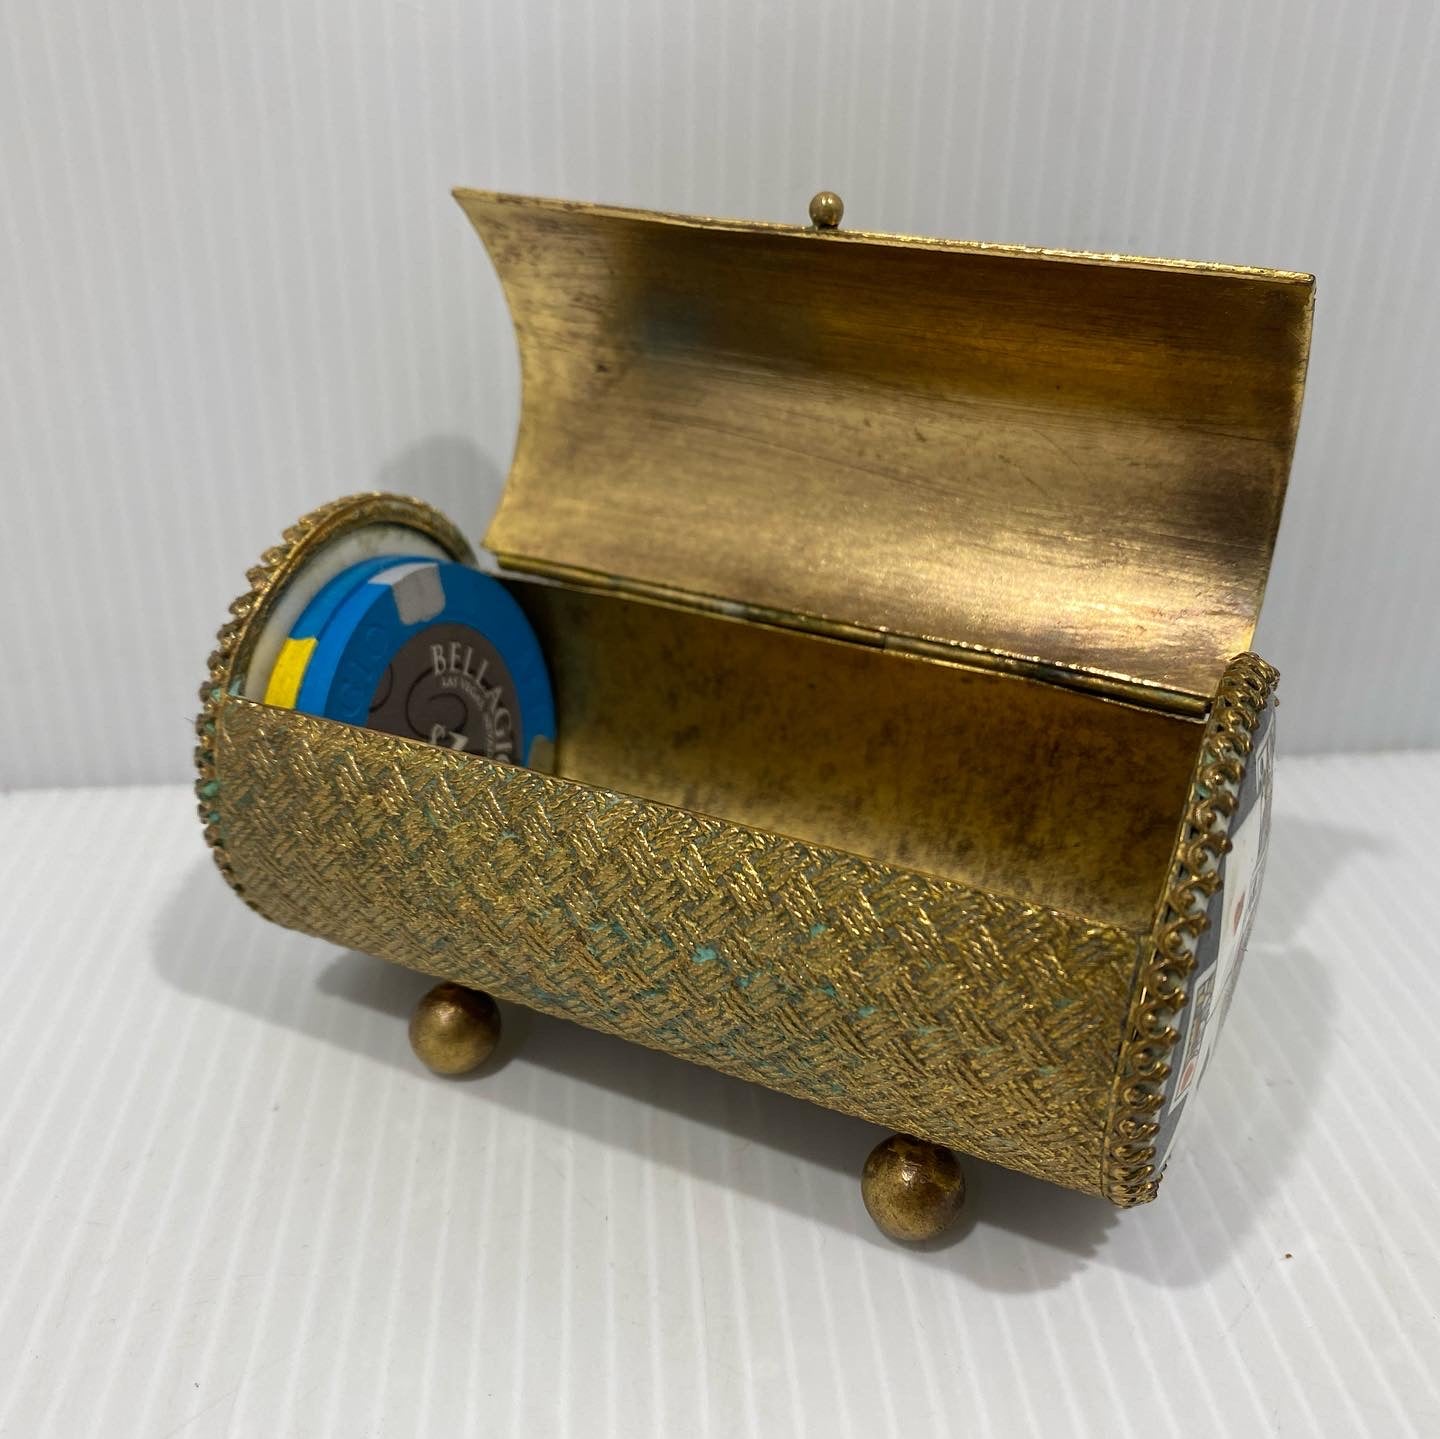 Beautiful and rare art deco, brass and enamel,  Sarcophagus shaped poker chip holder.